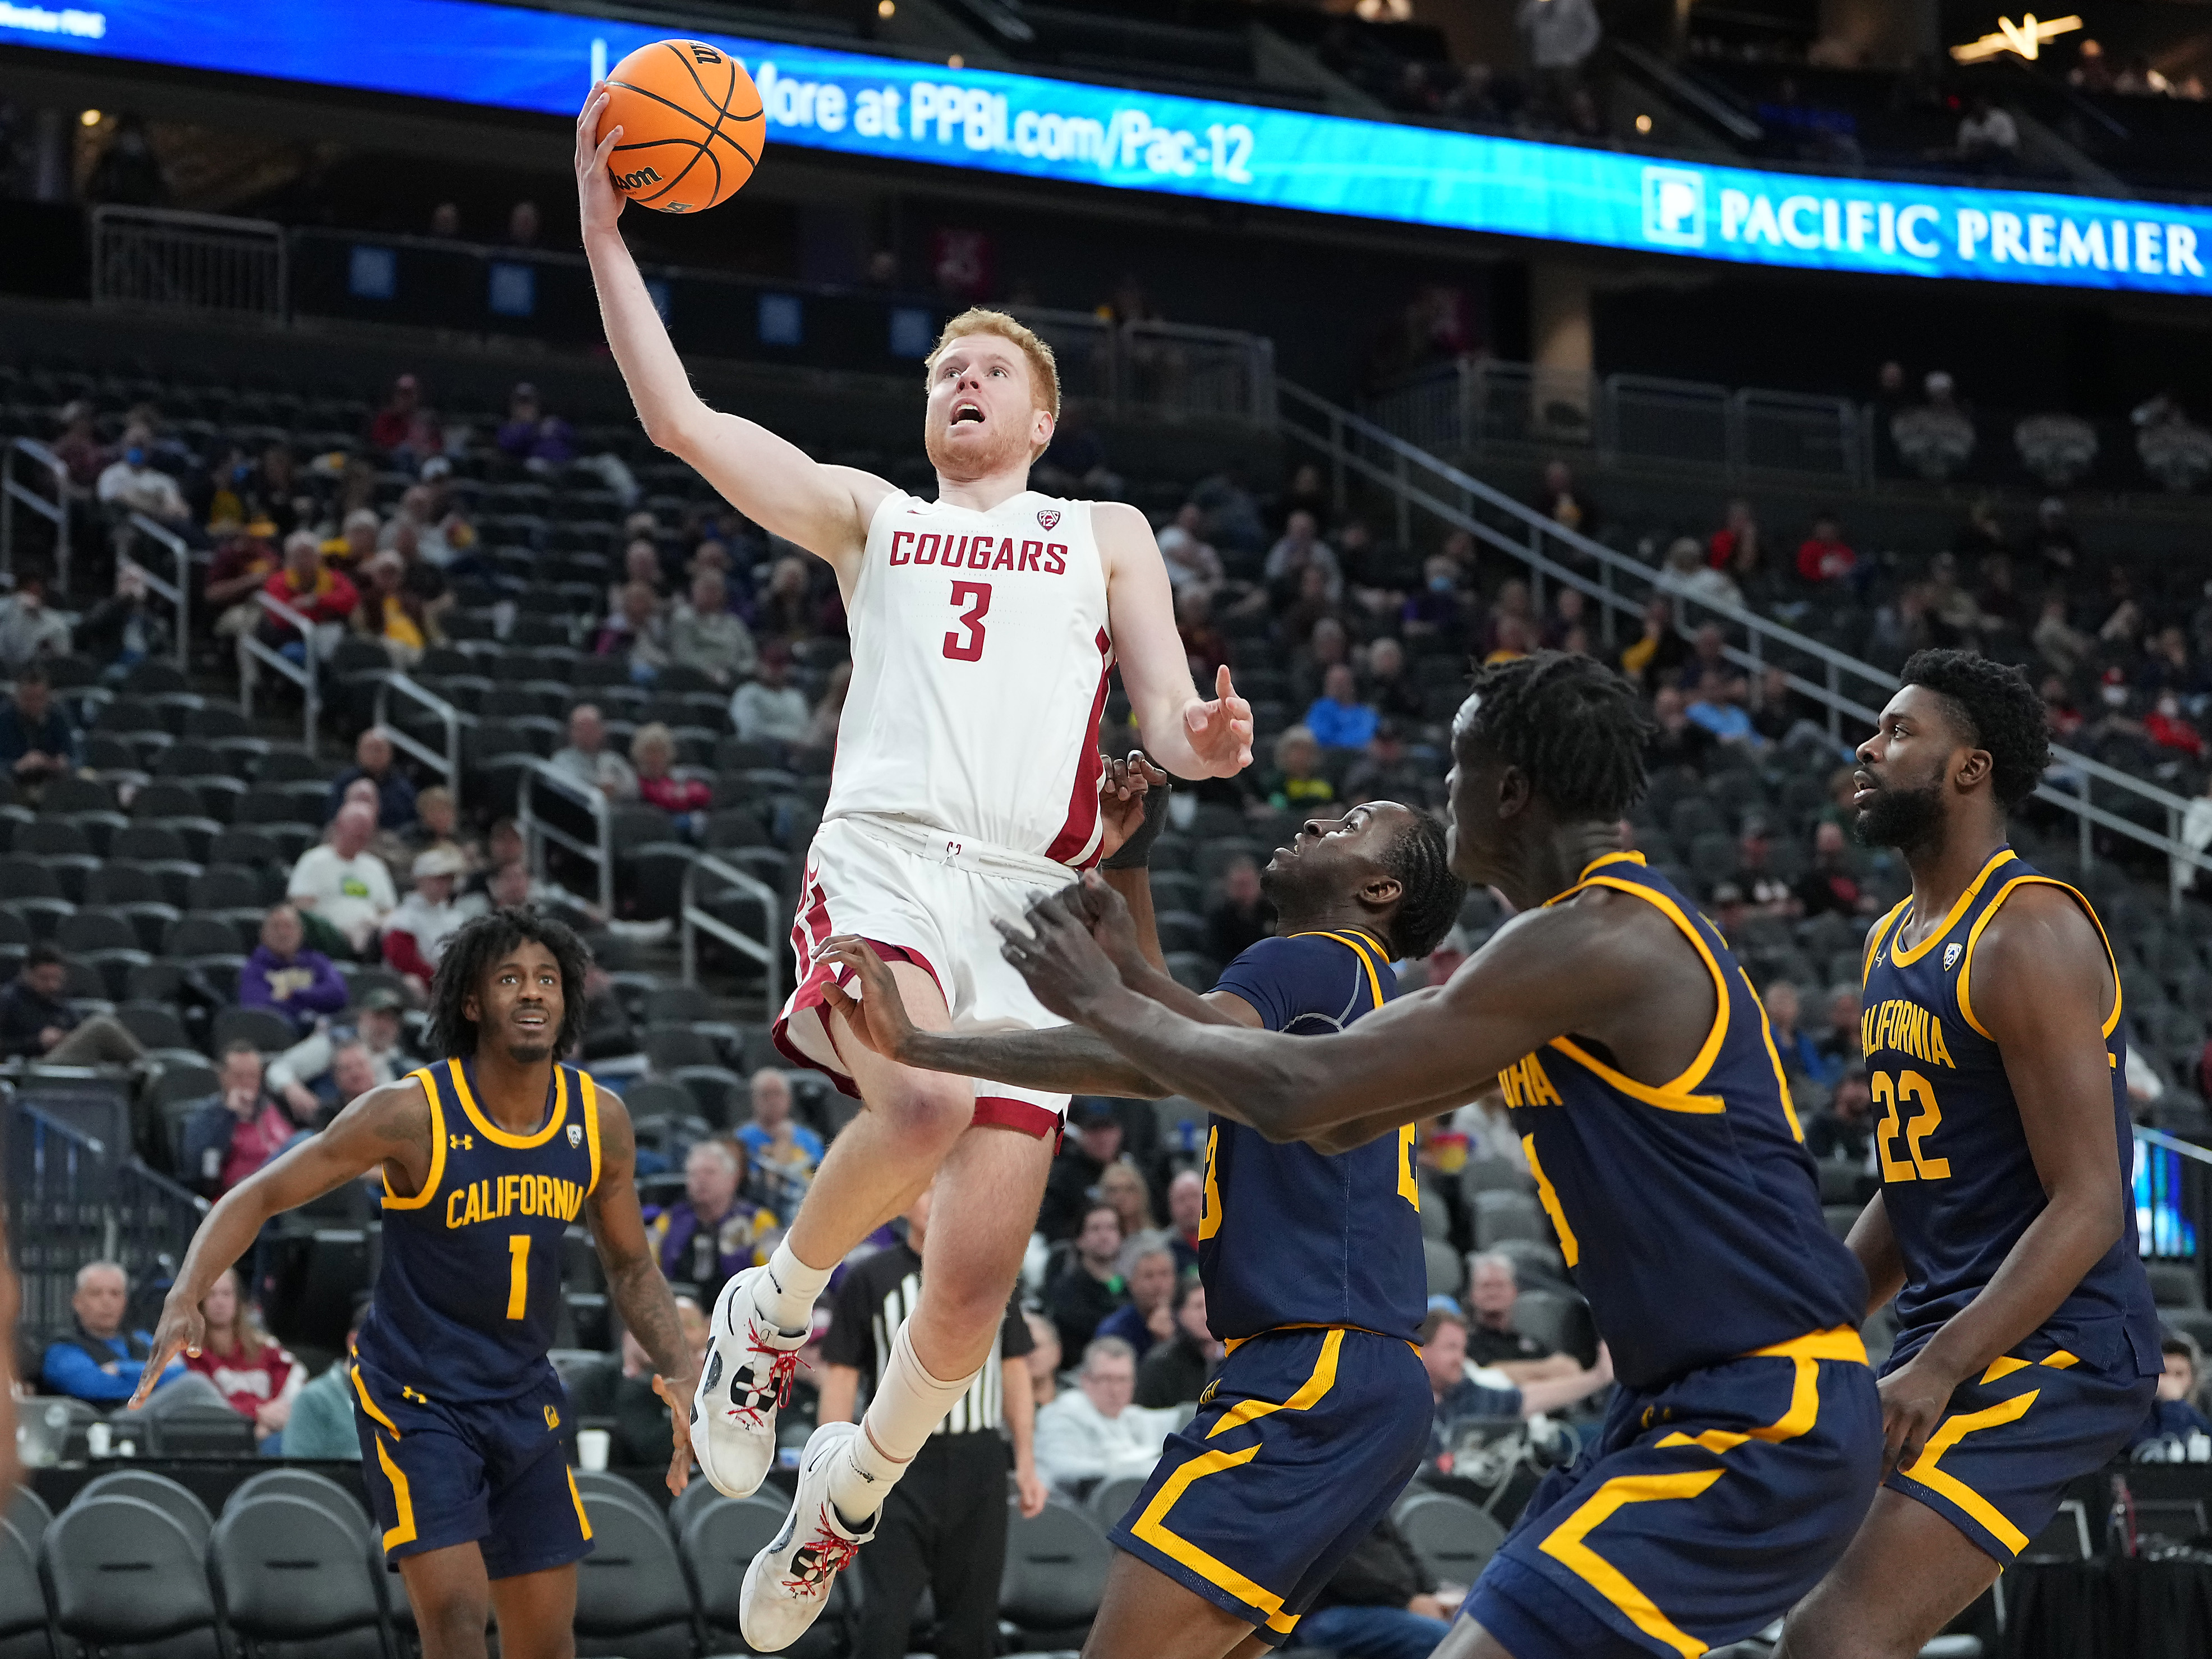 NCAA Basketball: Pac-12 Conference Tournament First Round - Washington State vs California